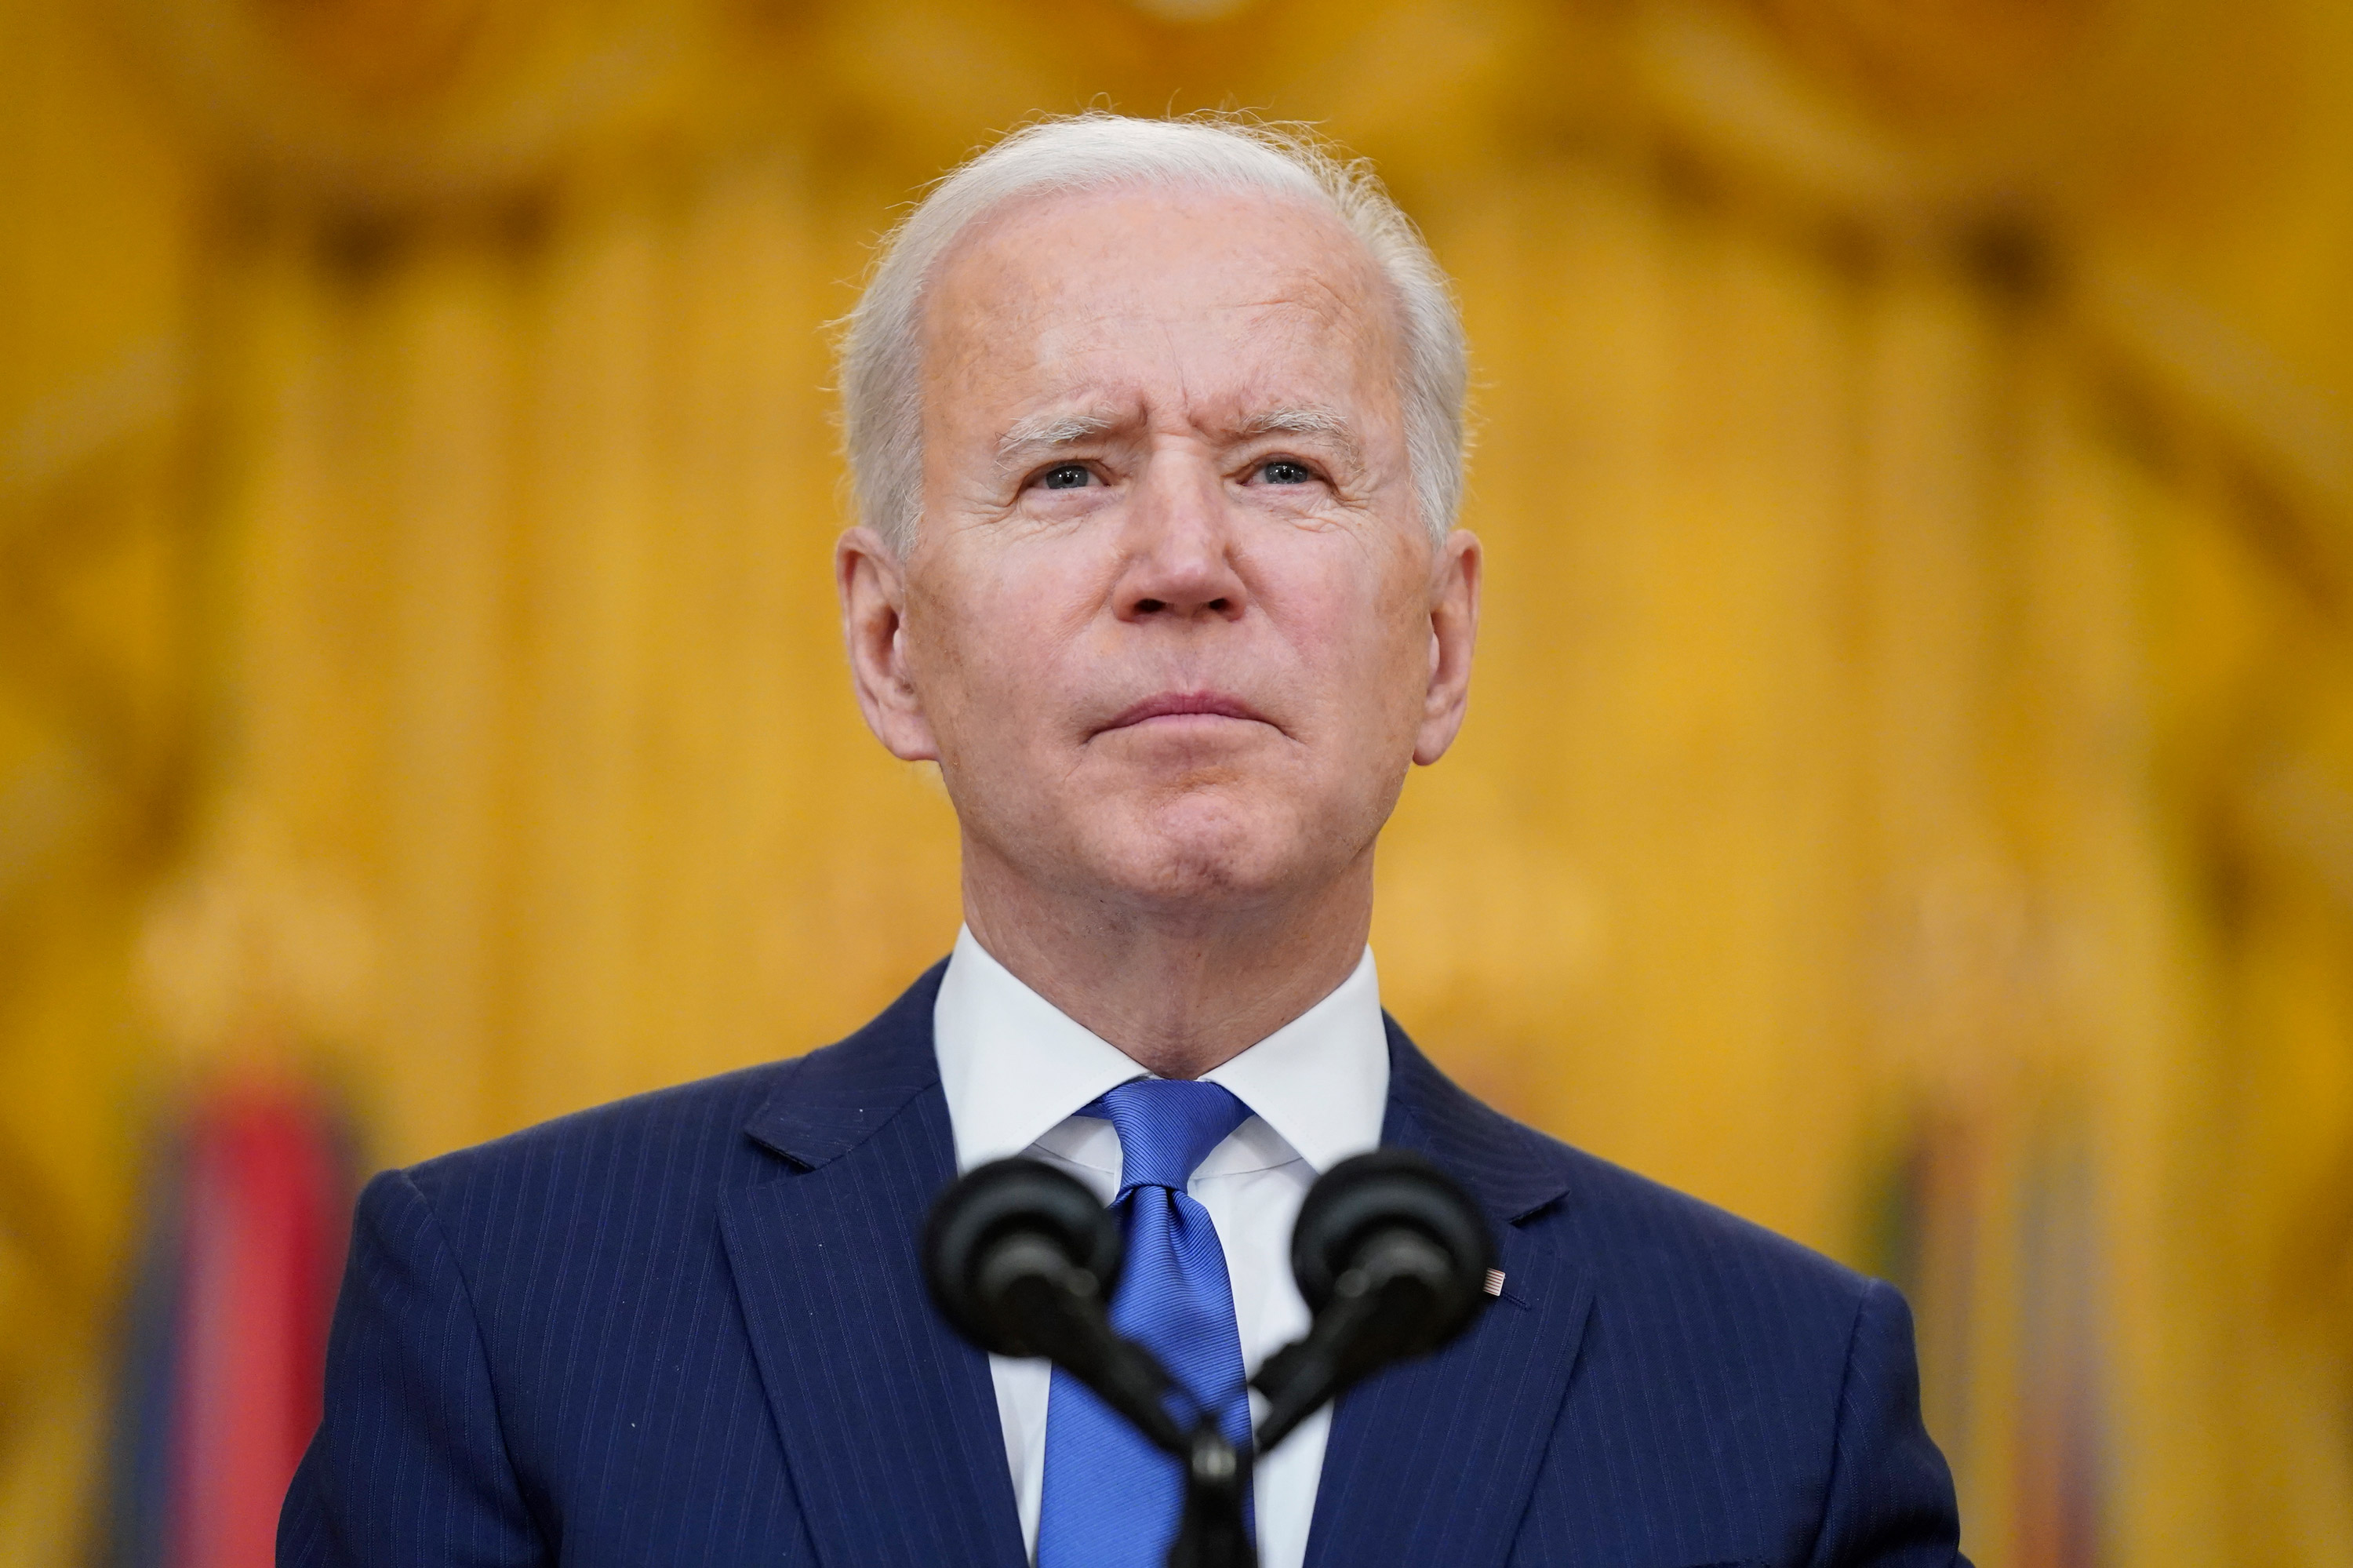 President Joe Biden speaks during an event in the East Room of the White House in Washington, DC, on March 8.